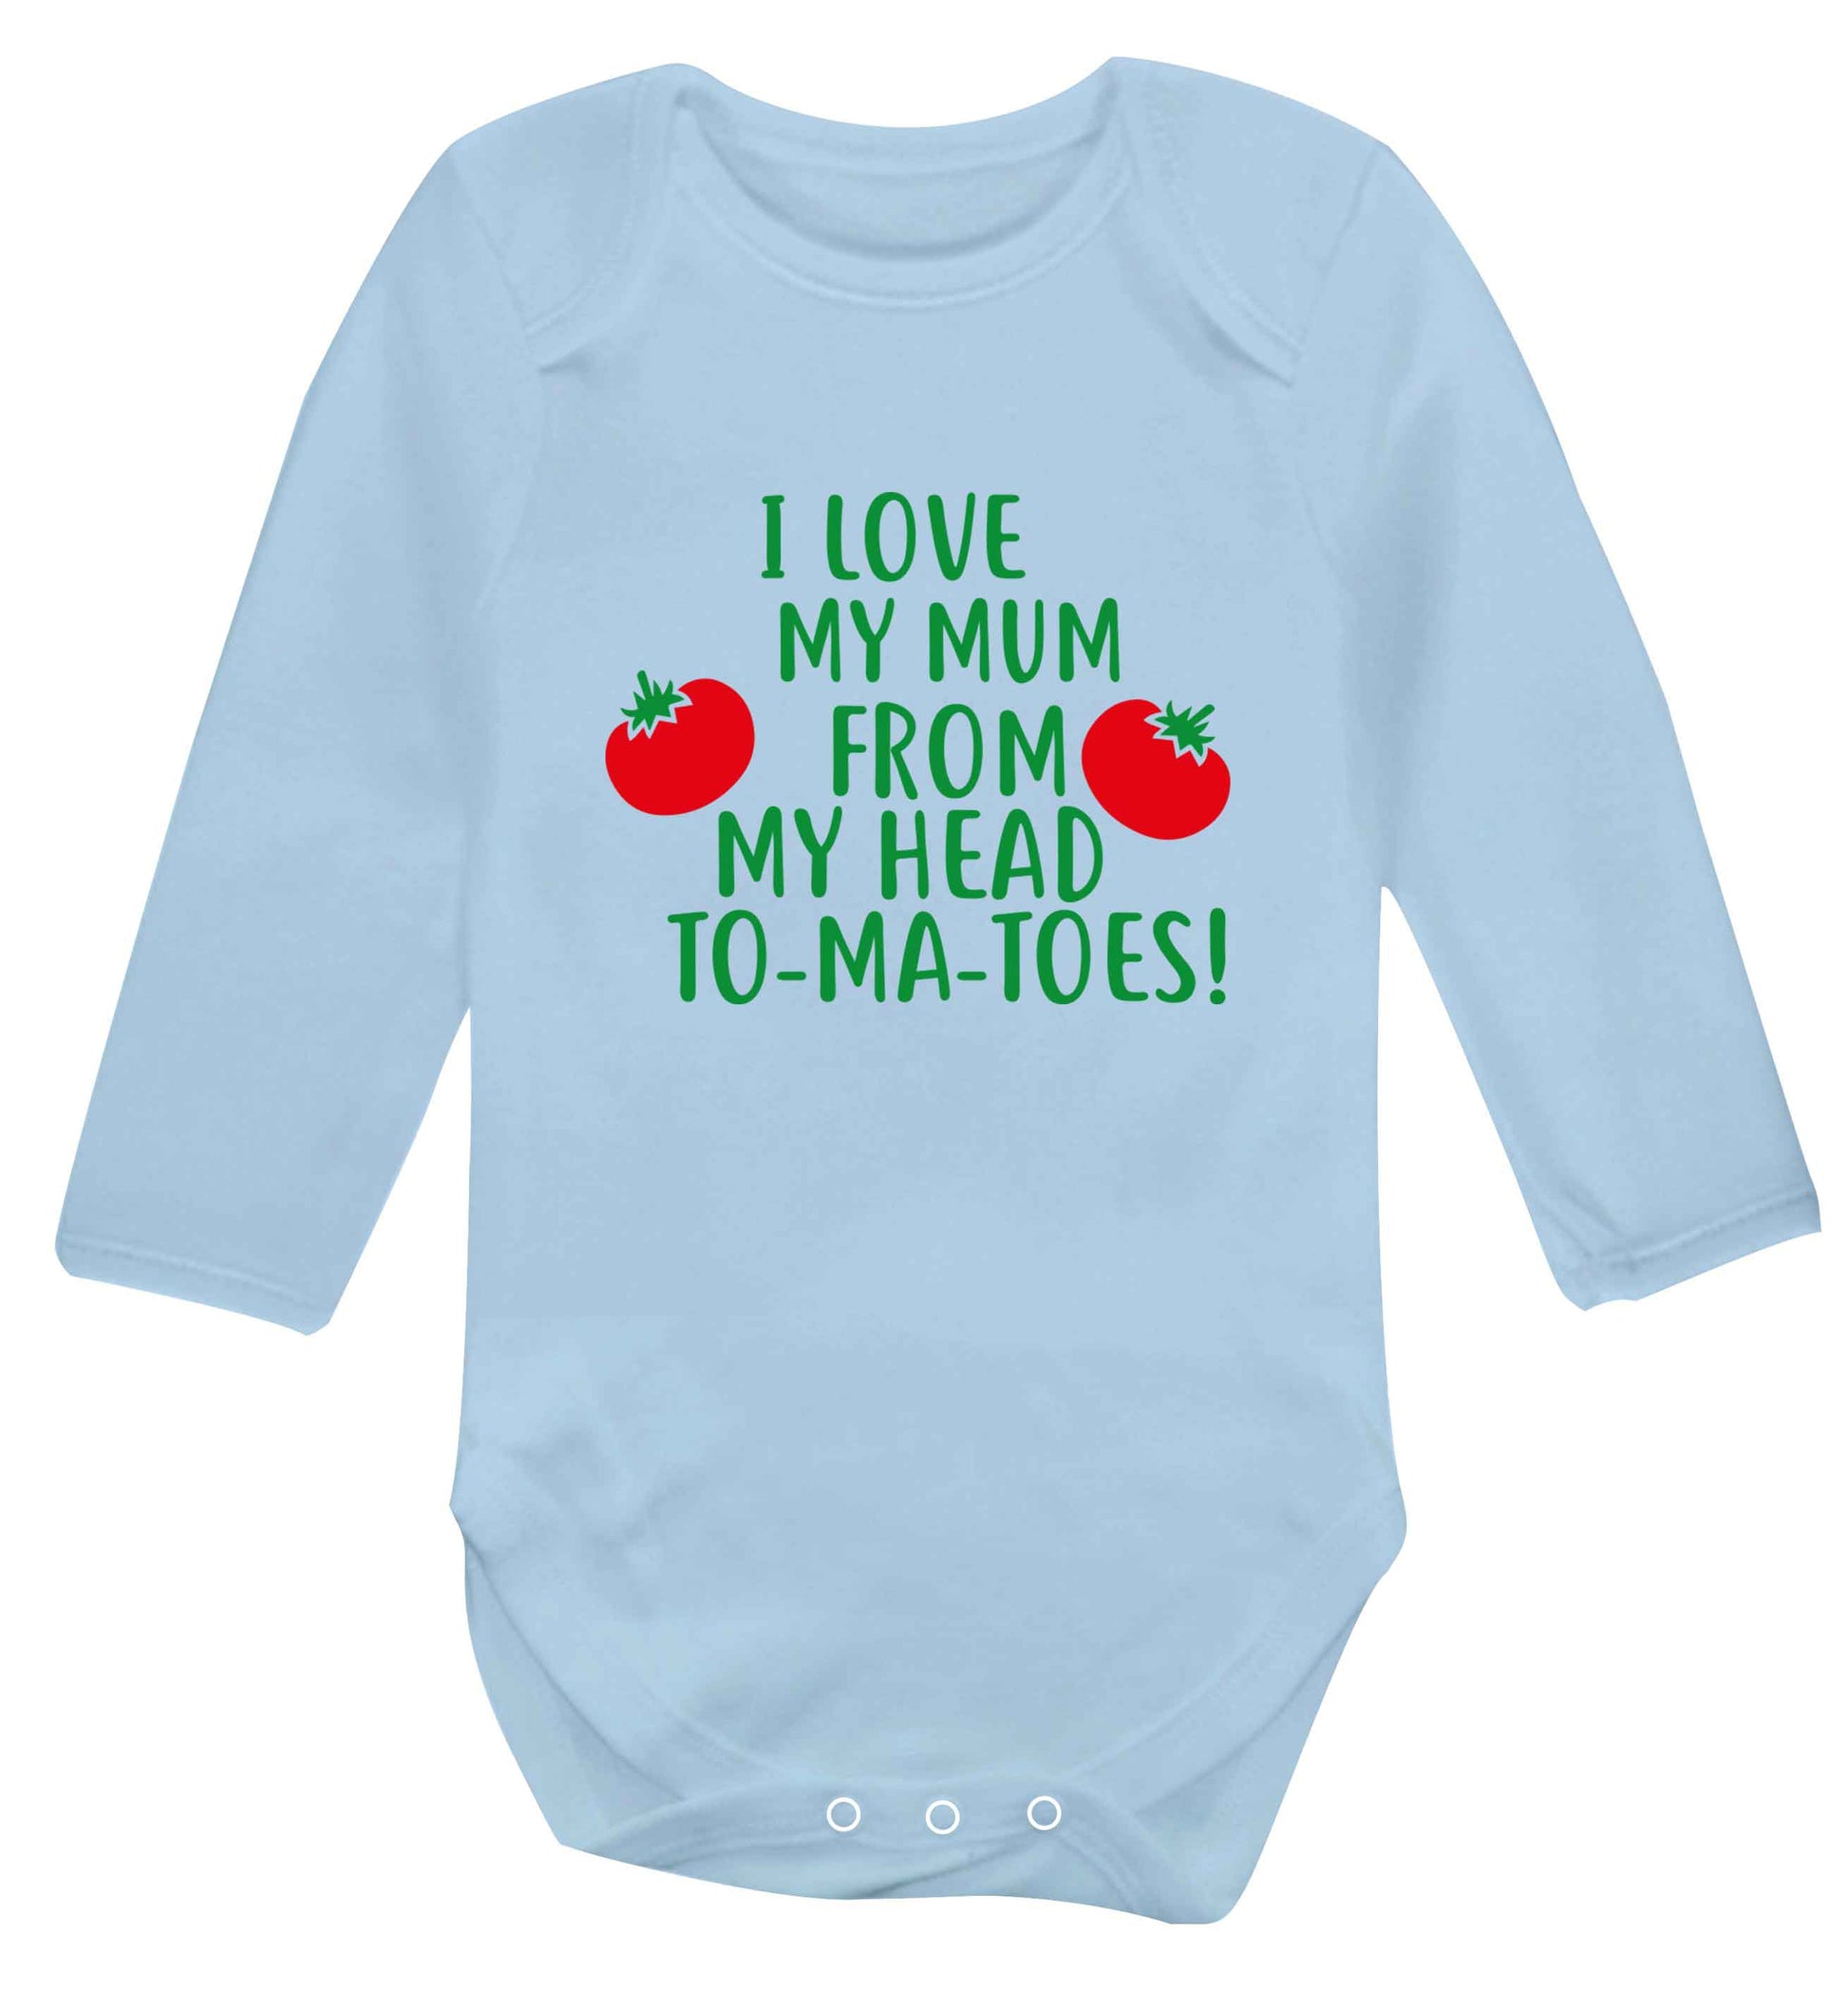 I love my mum from my head to-my-toes! baby vest long sleeved pale blue 6-12 months